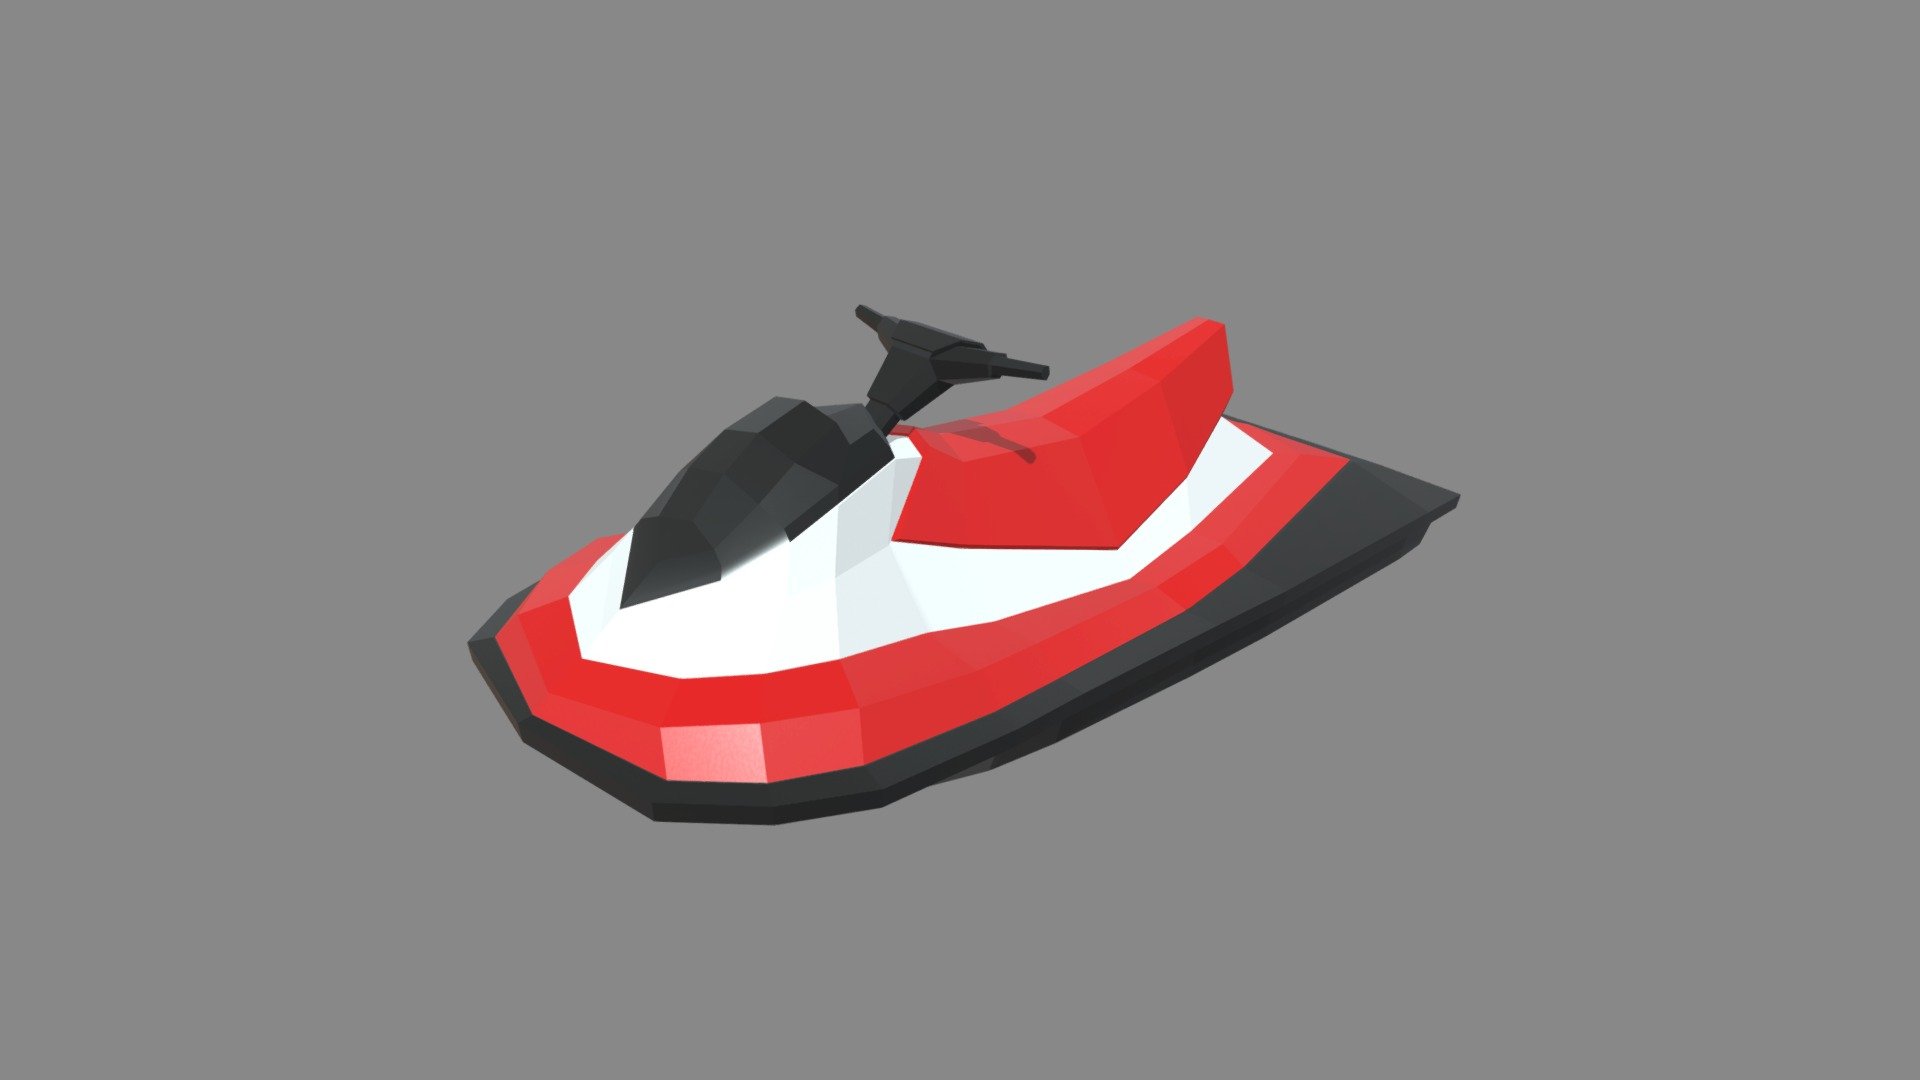 This model contains a Low Poly Jet Ski 01 based on a jet ski which i modeled in Maya 2018. This model is perfect to create a new great scene with different low poly cars or low poly vehicles. I will add a low poly vehicles pack soon on my profile.

There is an automatic UV and one unique UV with a substance painter file added.

Tris: 958 // Verts: 491

The model is ready as one unique part and ready for being a great CGI model and also a 3D printable model, i will add the STL model, tested for 3D printing in Ultimaker Cura. I uploaded the model in .mb, ,blend, .stl, .obj and .fbx. as well as the subtance painter file.

If you need any kind of help contact me, i will help you with everything i can. If you like the model please give me some feedback, I would appreciate it.

Don’t doubt on contacting me, i would be very happy to help. If you experience any kind of difficulties, be sure to contact me and i will help you. Sincerely Yours, ViperJr3D - Low Poly Jet Ski 01 - Buy Royalty Free 3D model by ViperJr3D 3d model